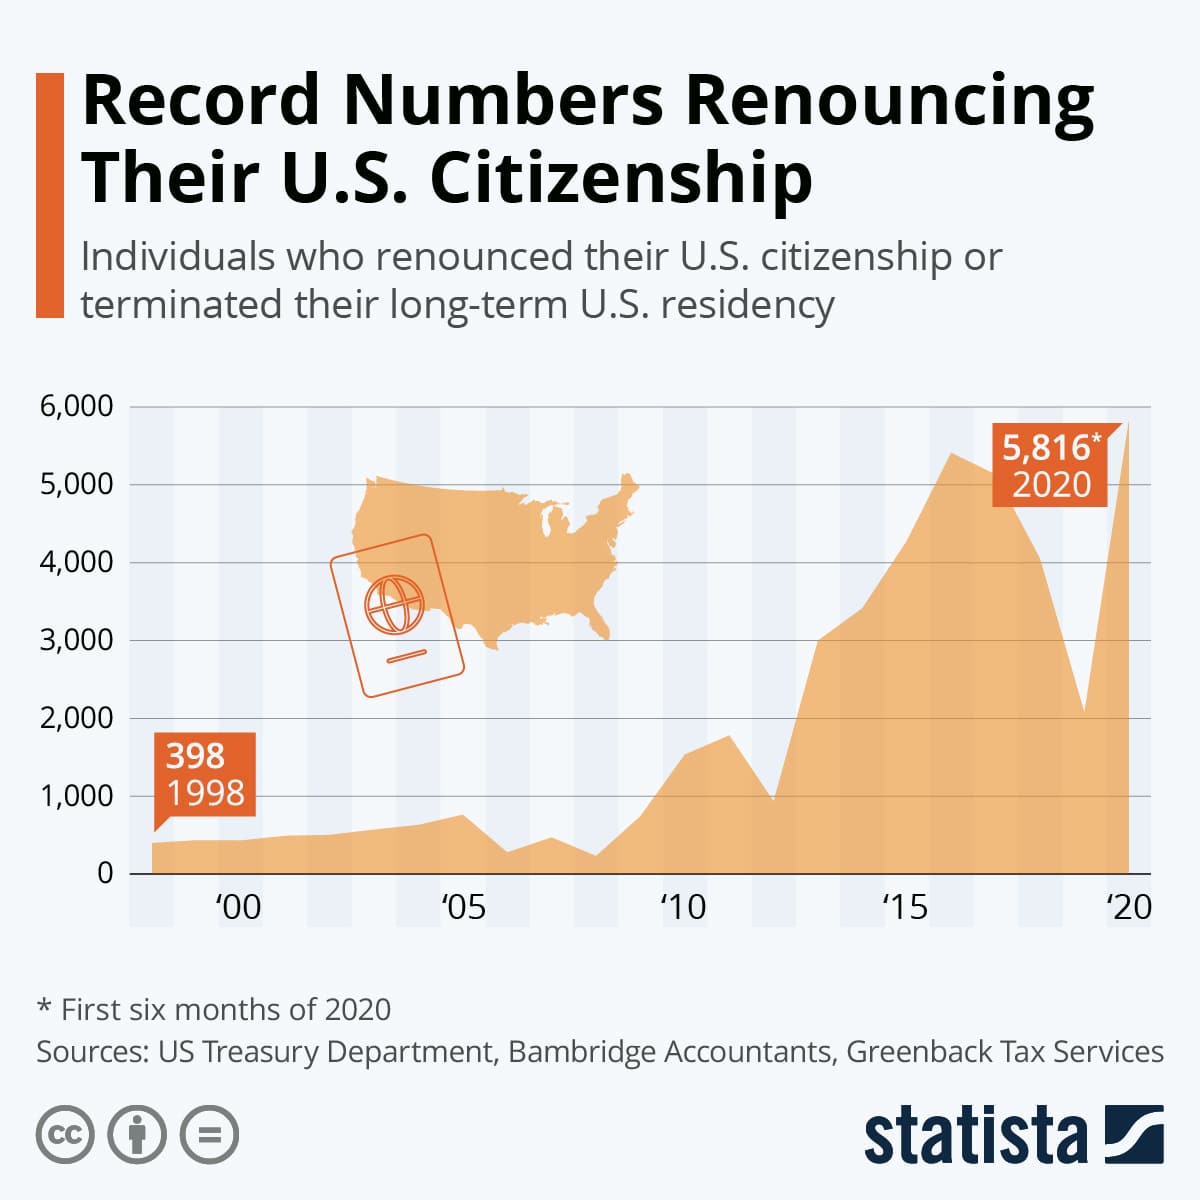 Area graph showing the upward trend of U.S. citizens renouncing their citizenship